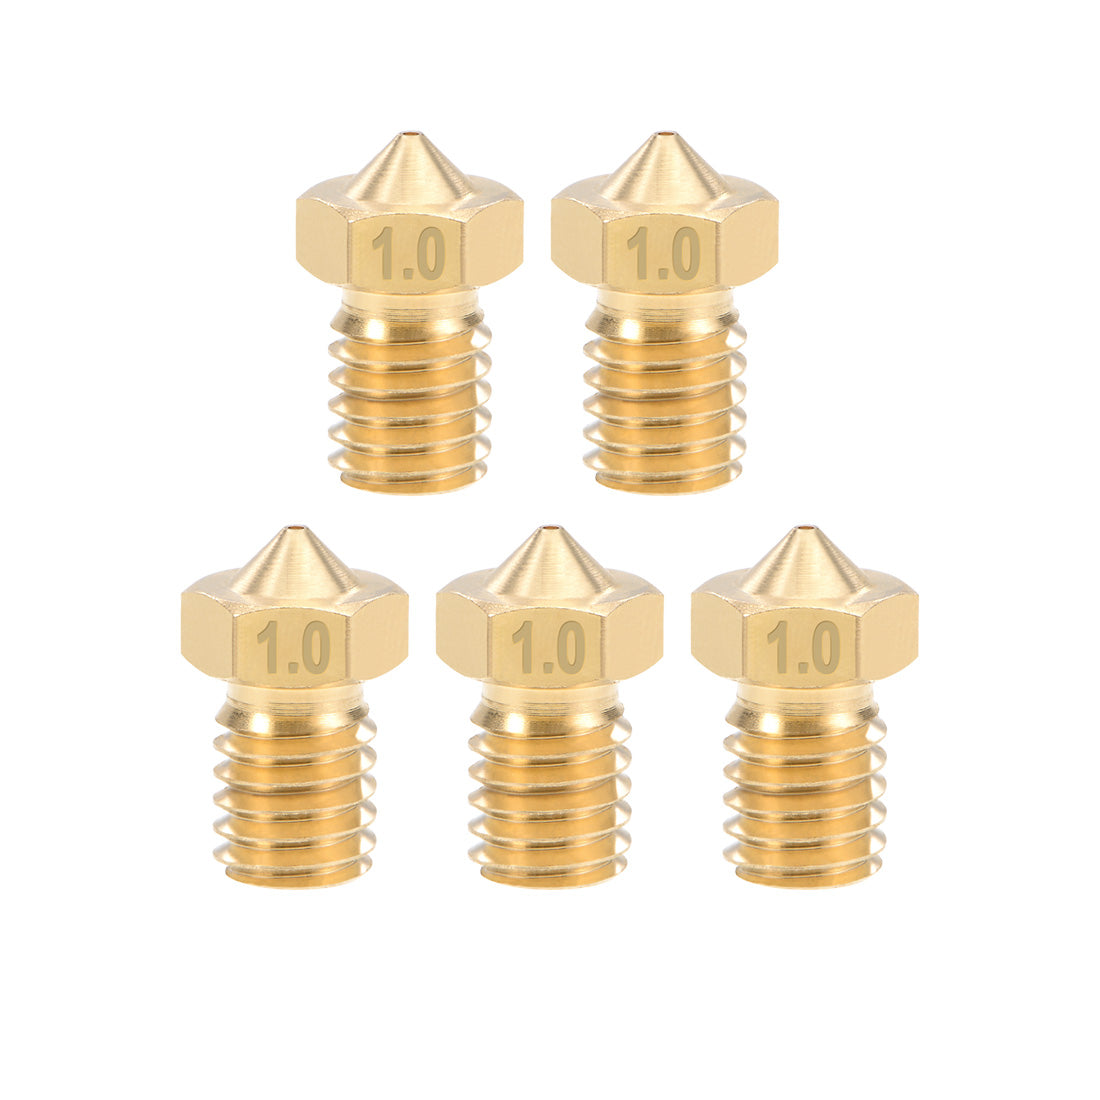 uxcell Uxcell 1mm 3D Printer Nozzle Head M6 Thread Replacement for V5 V6 1.75mm Extruder Print, Brass 5pcs